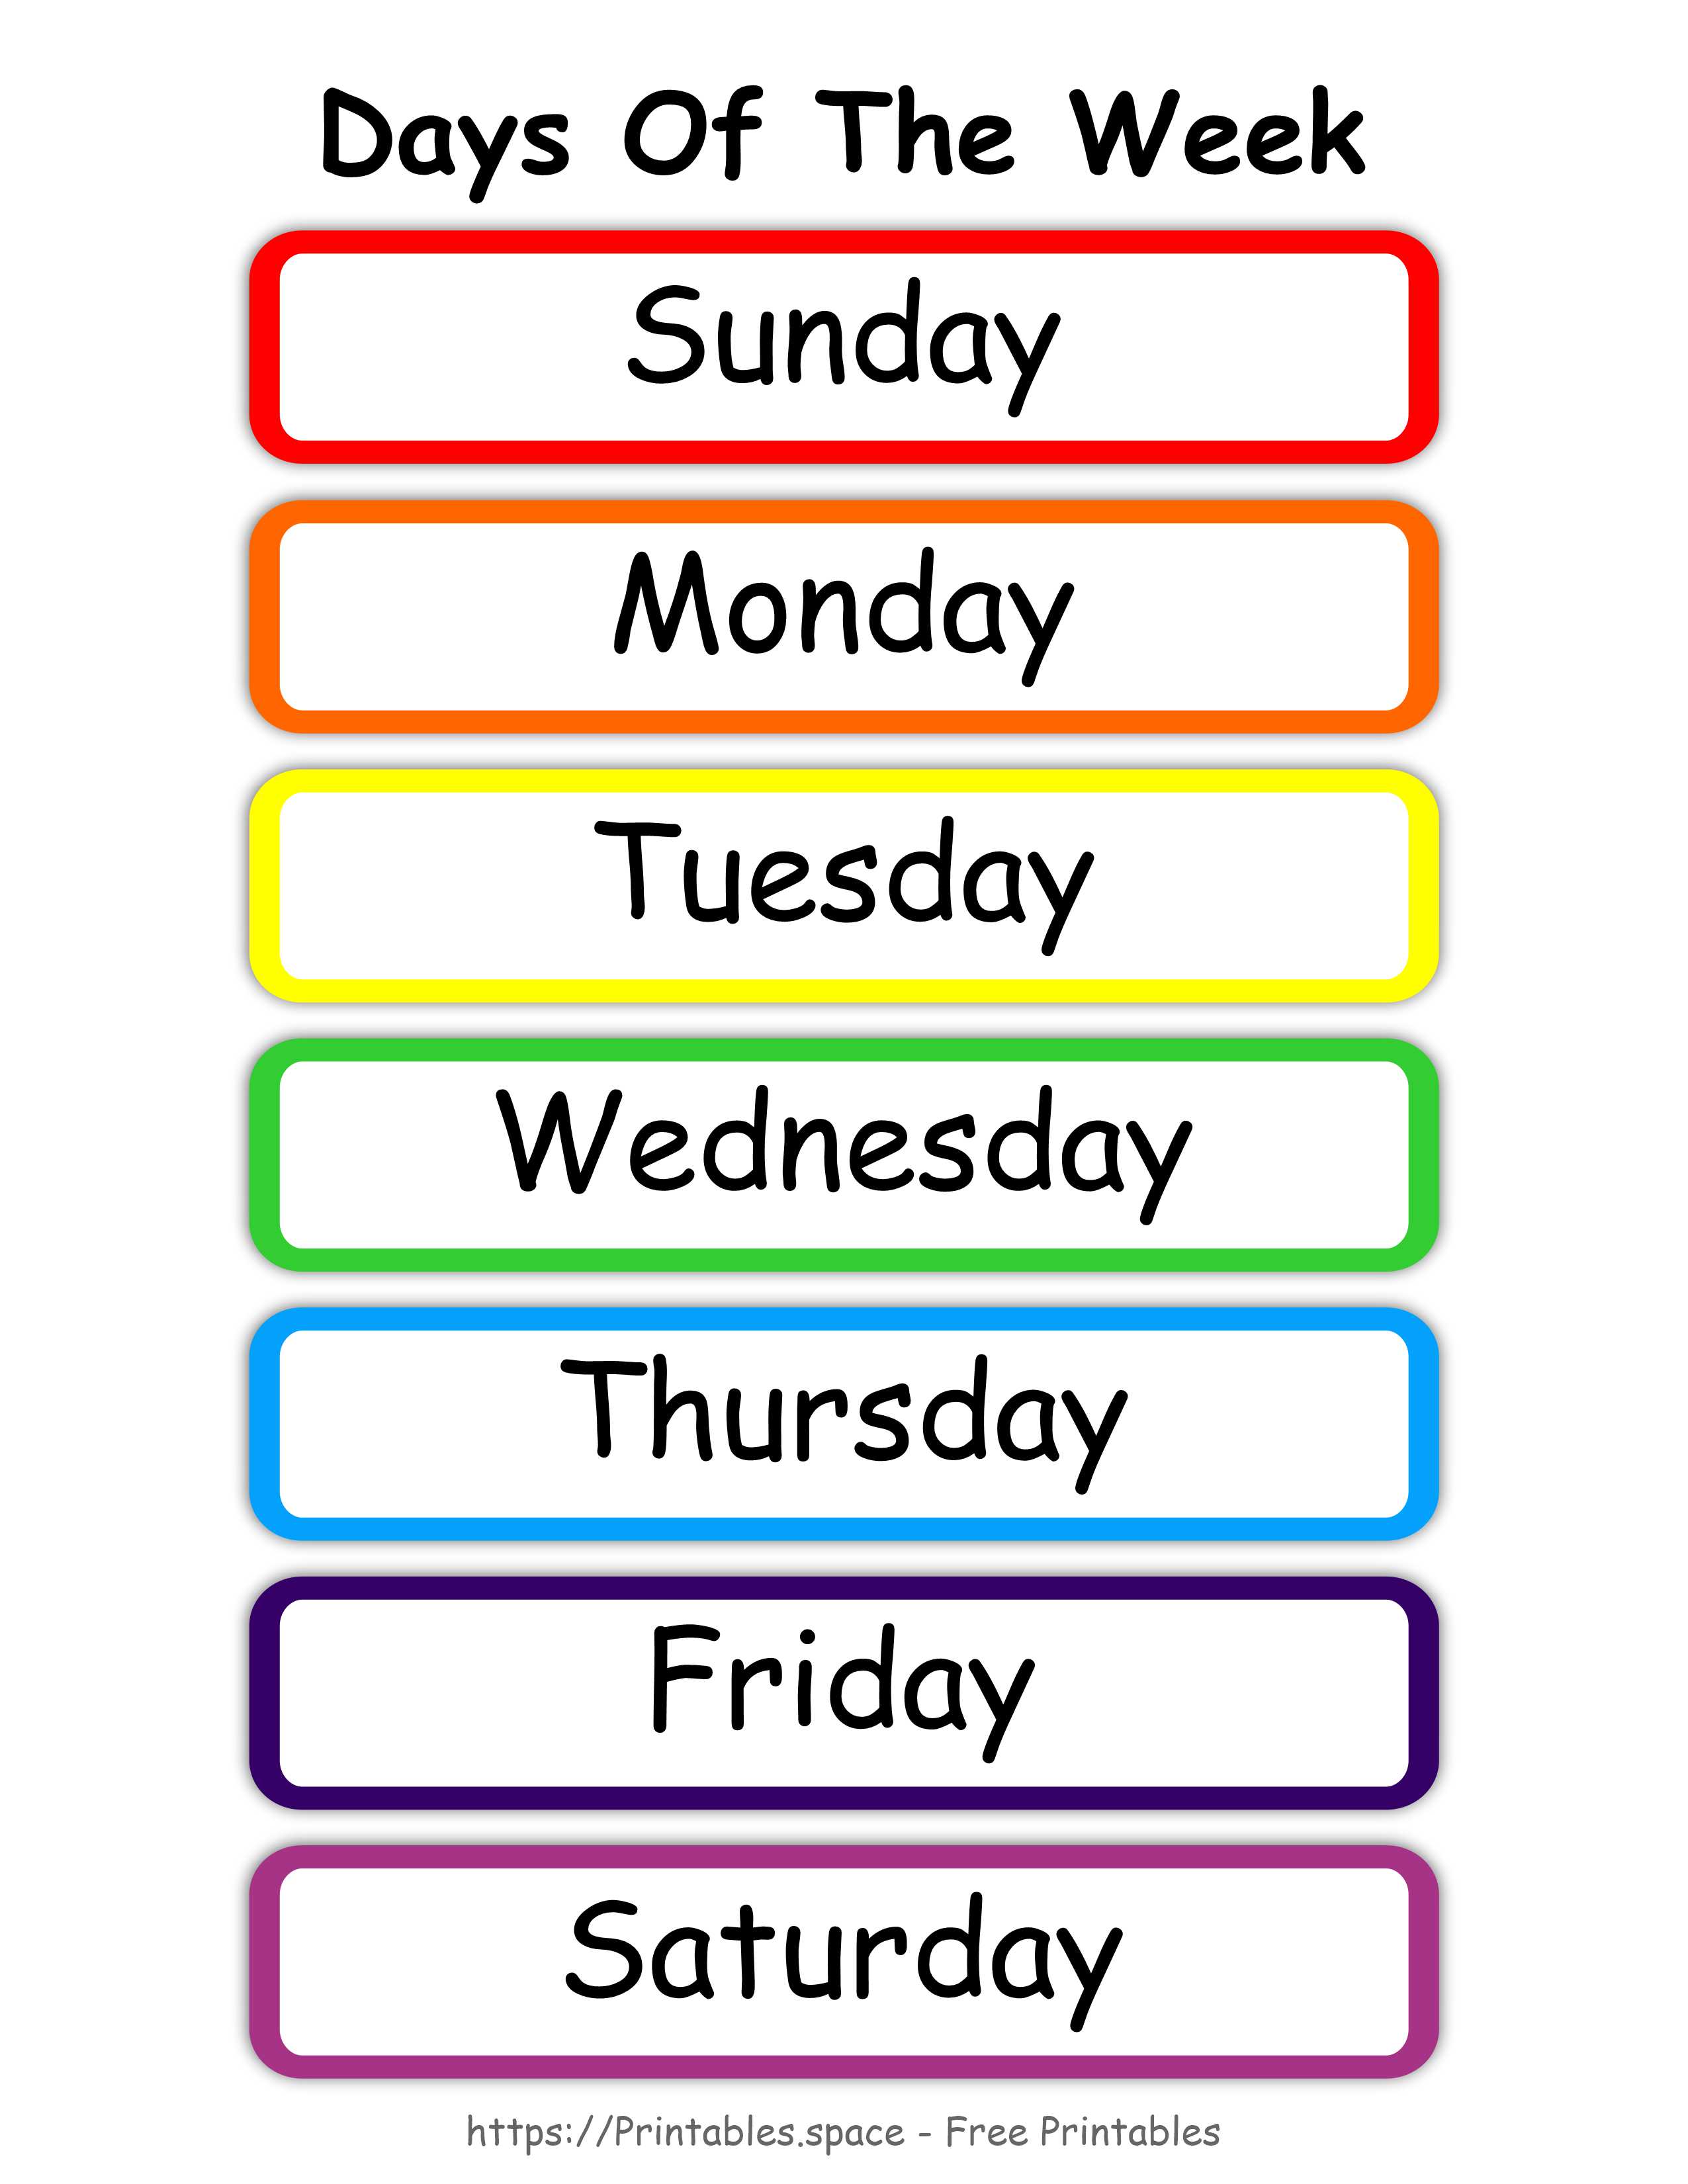 Days Of The Week Free Printable Cards